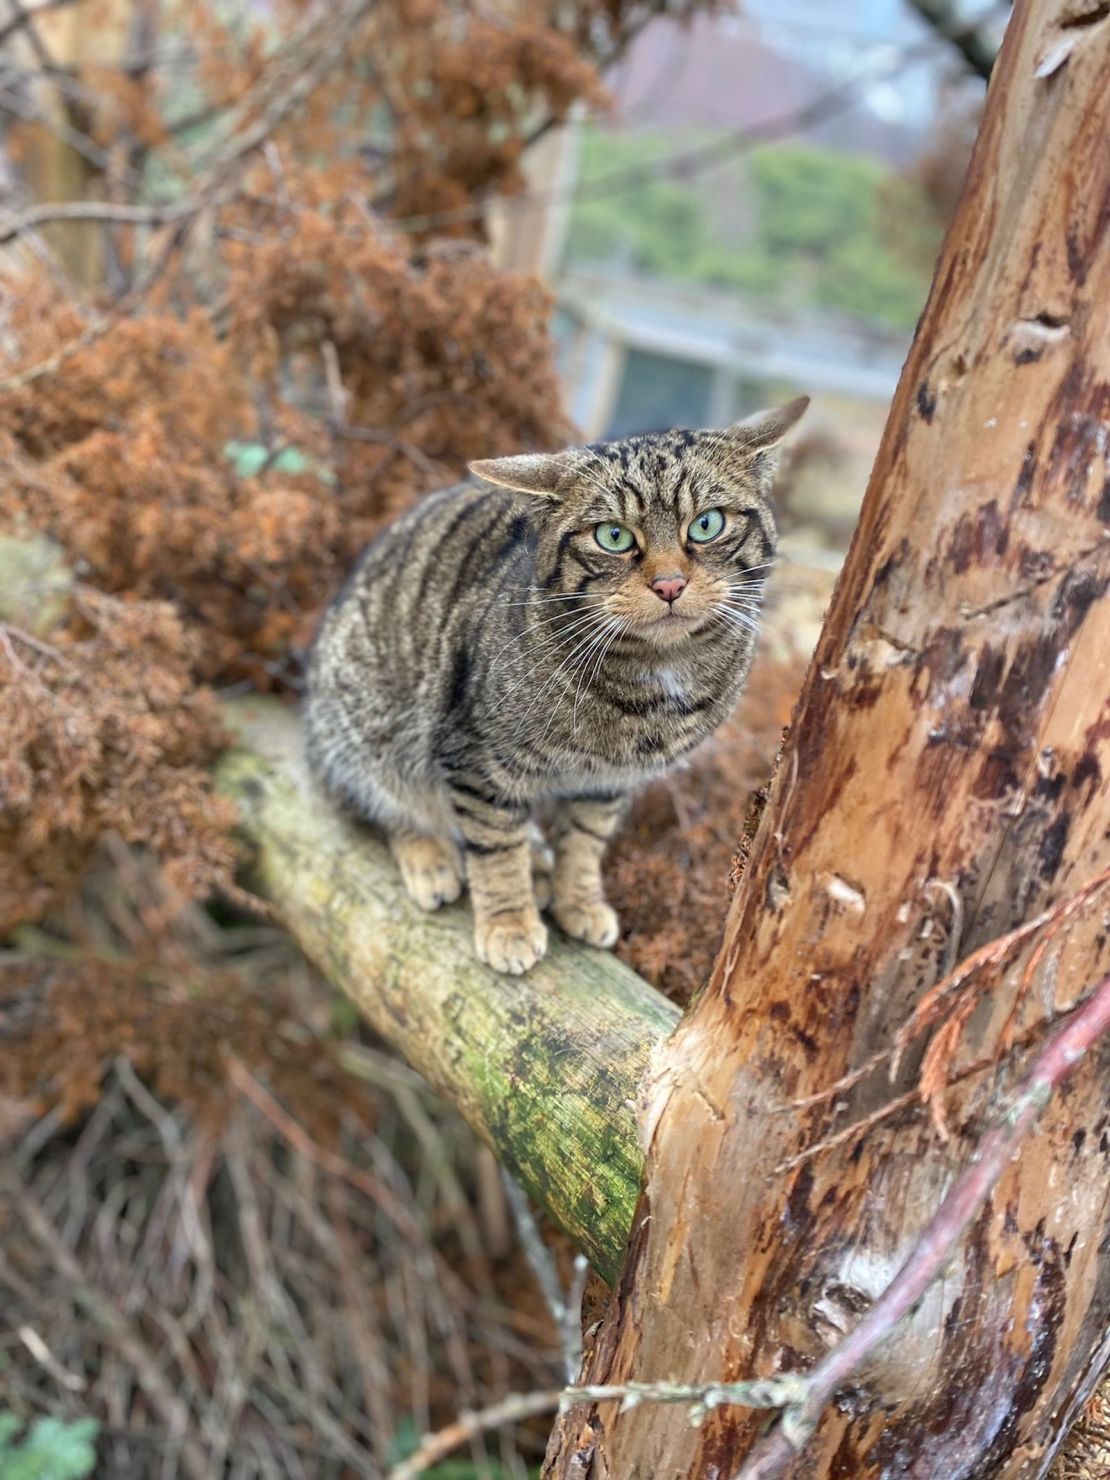 Saving Wildcats says the releases are the "first-ever conservation translocation of wildcats in Britain."